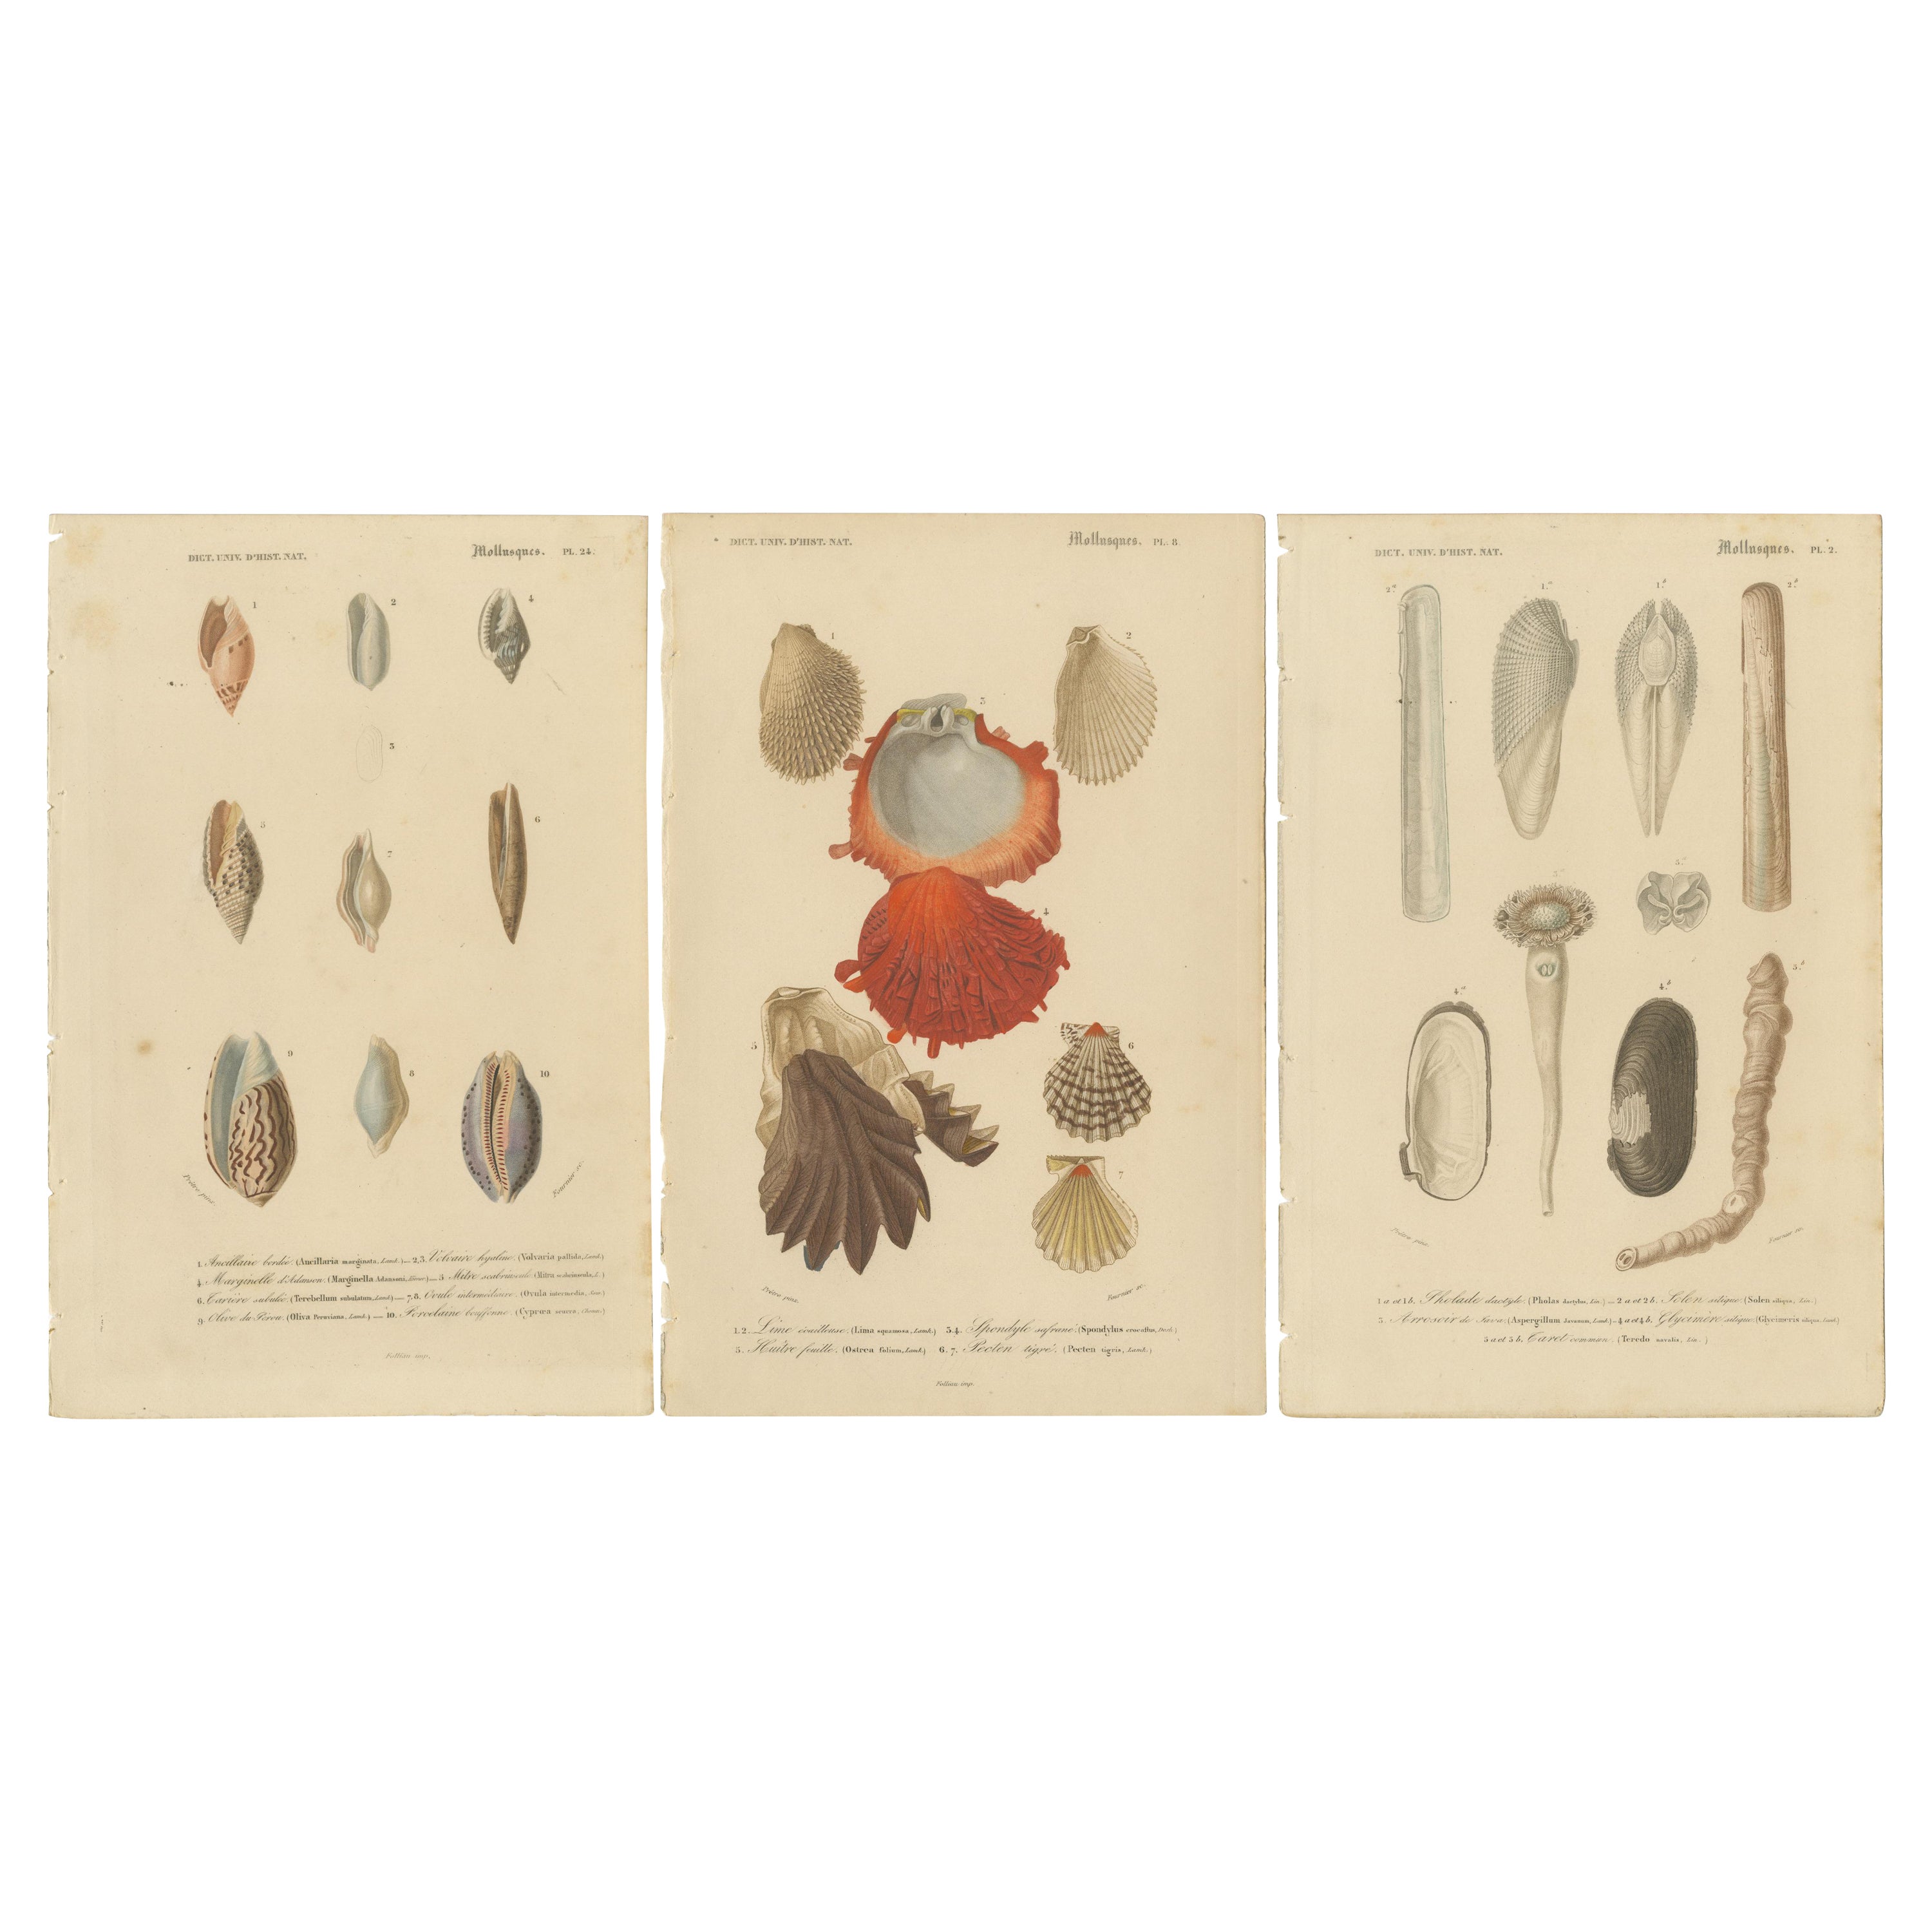 Aquatic Elegance: Molluscan Diversity Illustrated and Hand-Colored in 1849 For Sale